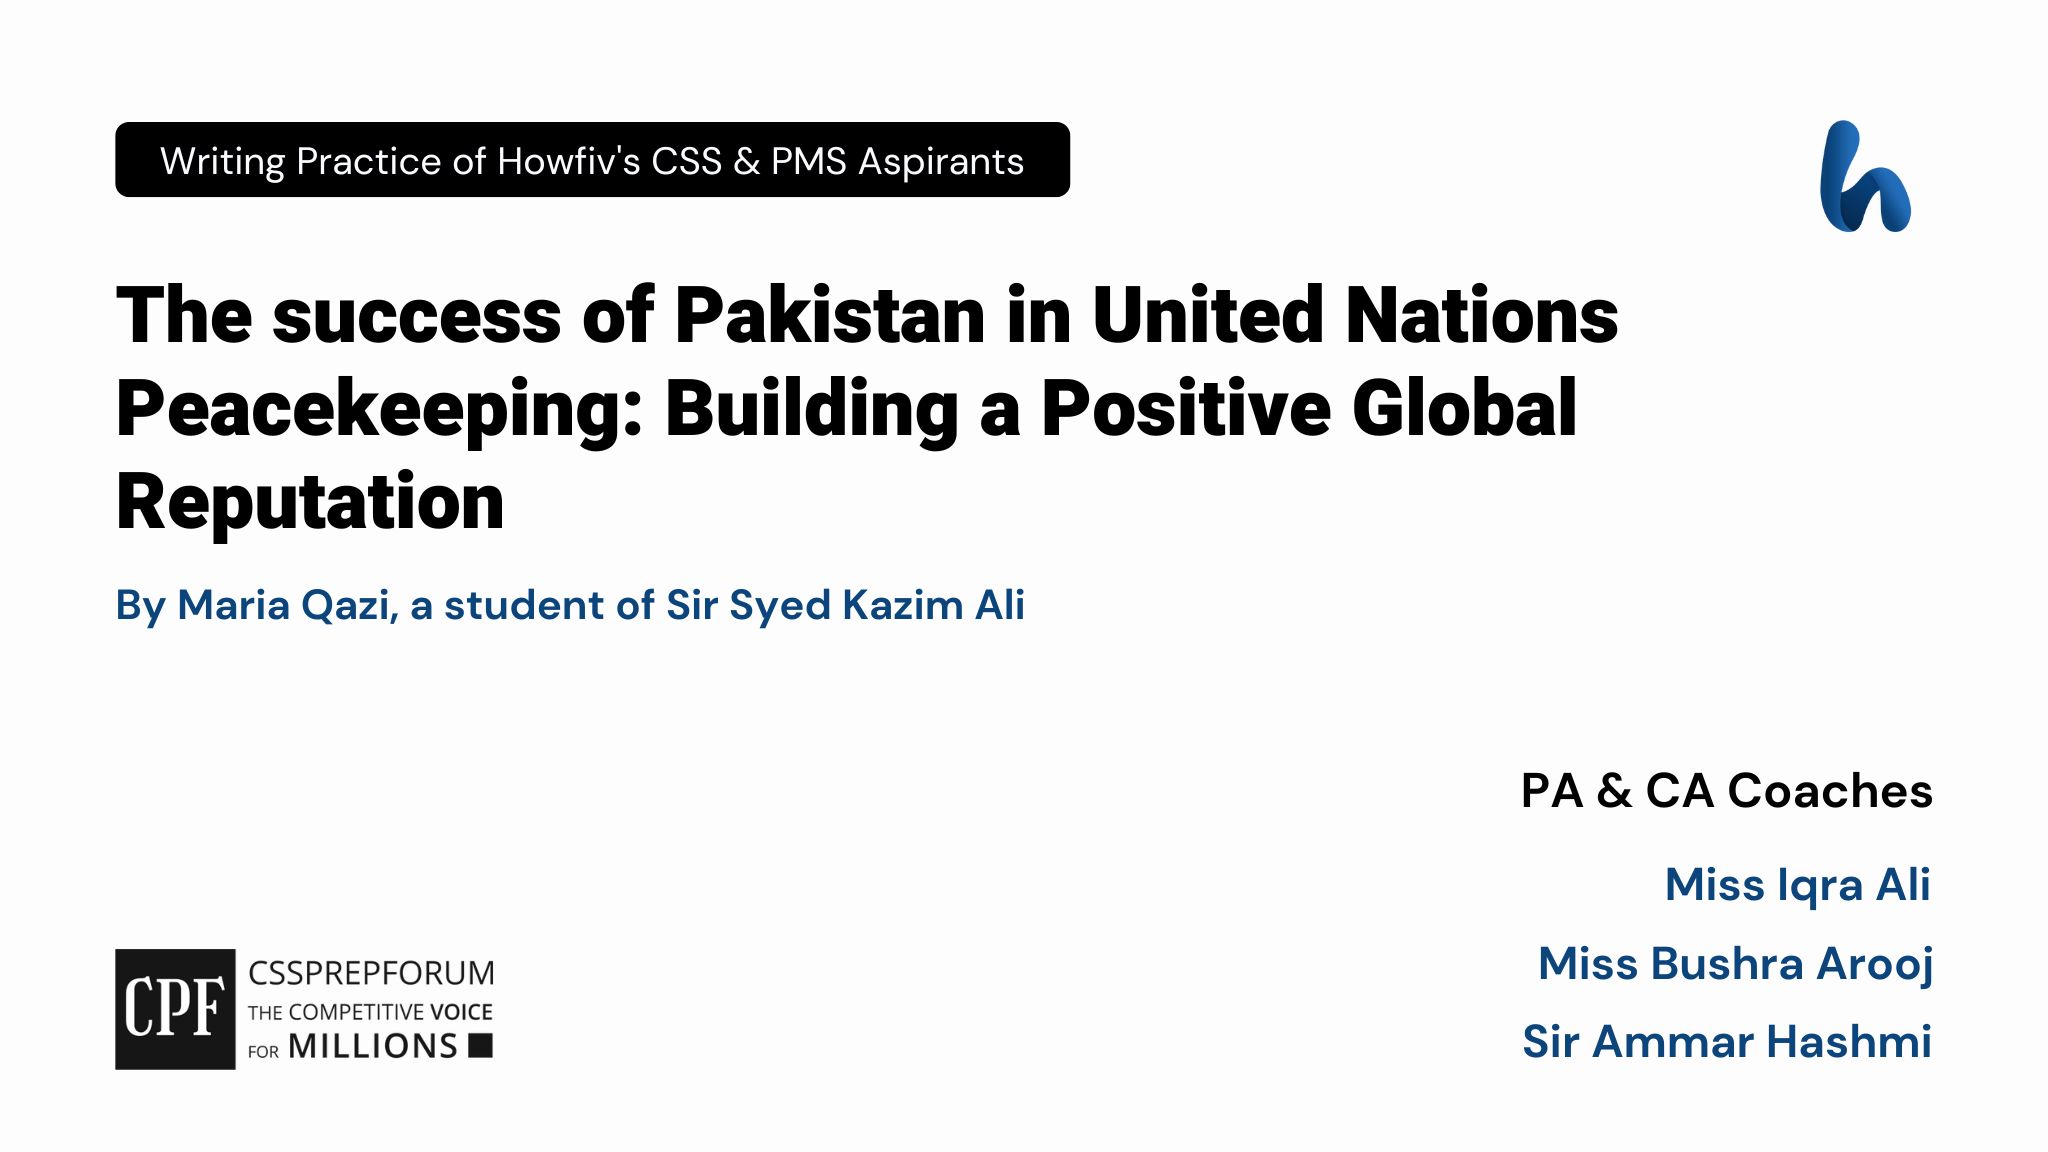 The success of Pakistan in United Nations Peacekeeping Building a Positive Global Reputation